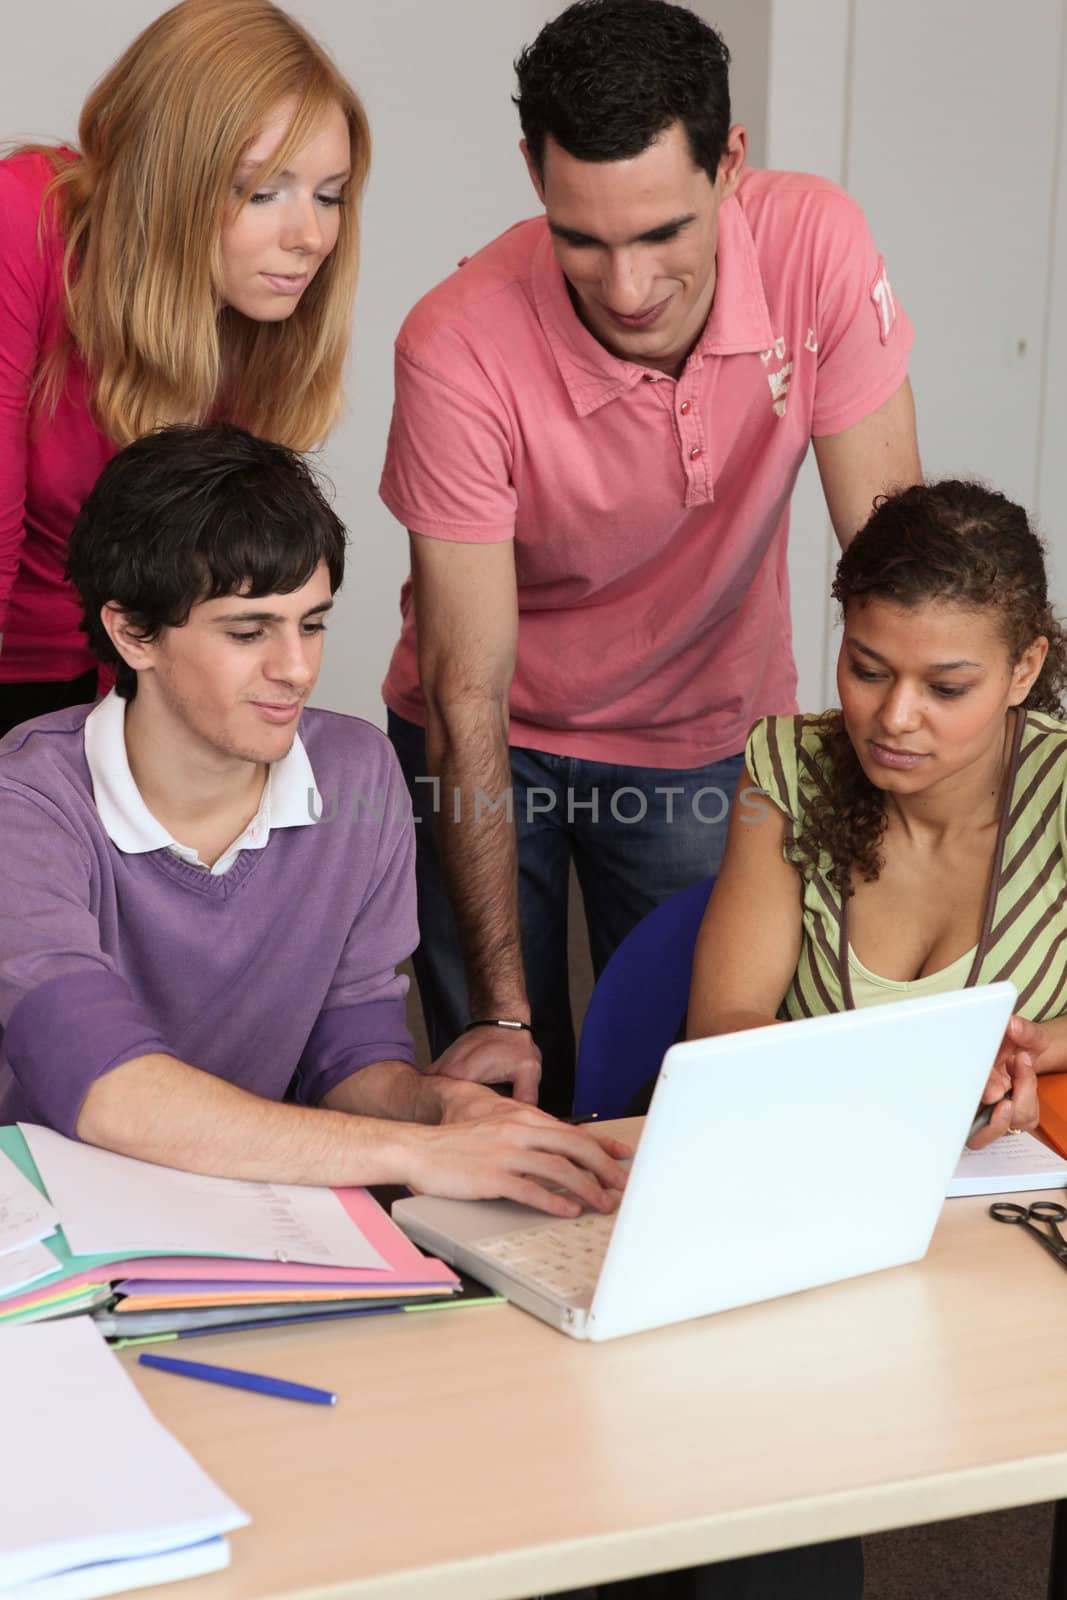 Four students in front of laptop by phovoir